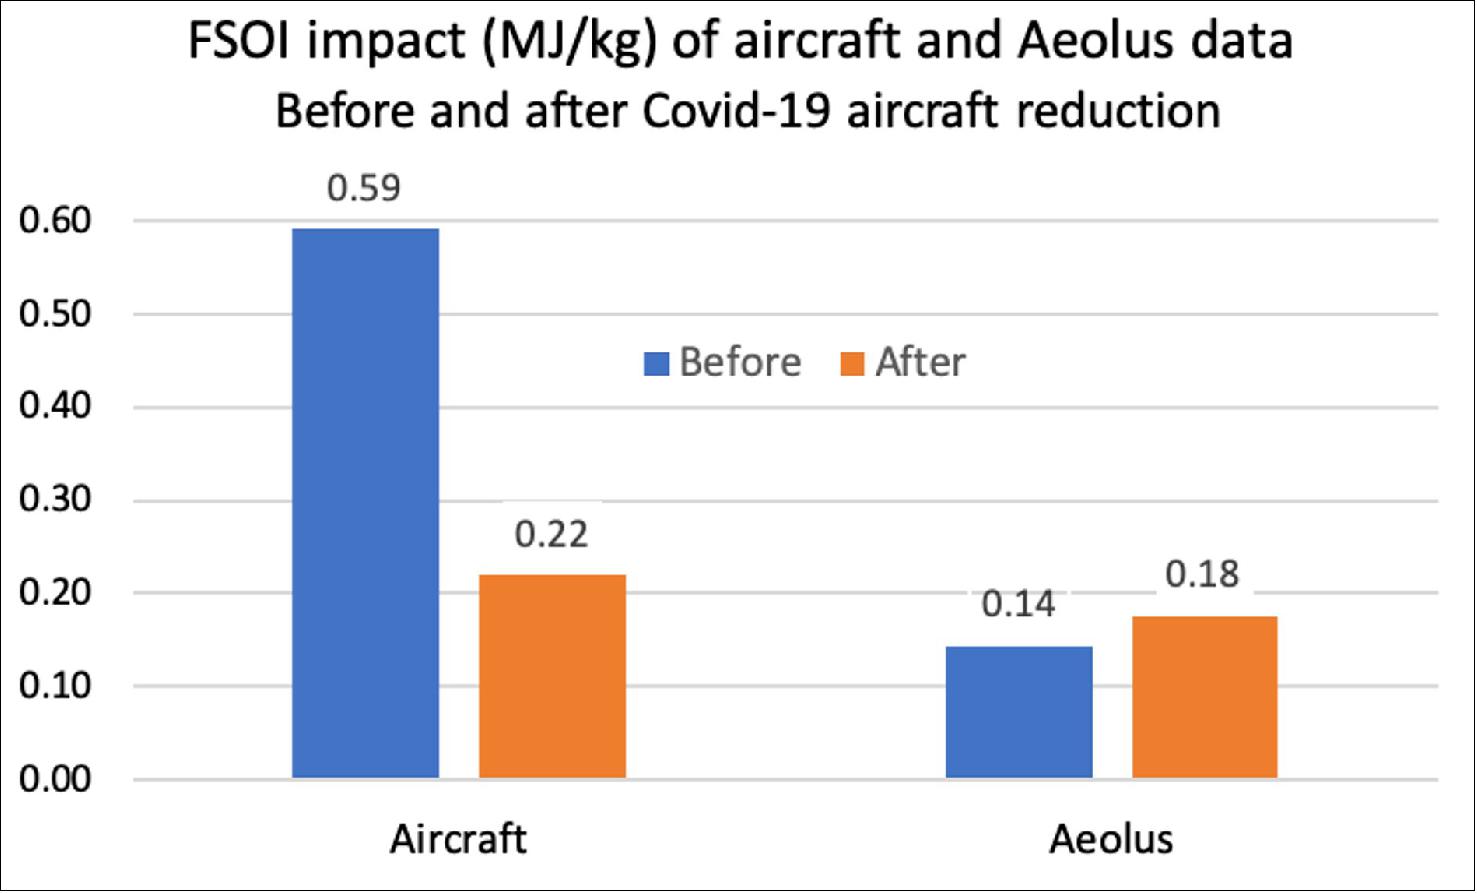 Figure 26: Impact of aircraft and Aeolus data in ECMWF forecasts before and after the COVID-19-related reduction in air traffic. Forecast Sensitivity to Observation Influence (FSOI) measures how various observing systems influence the ECMWF numerical weather forecast quality. The figure shows the total impact [Mega J/kg] of aircraft data and Aeolus data for two weeks before and after the reduction in aircraft data owing to COVID-19. The impact of Aeolus has increased by 23% (image credit: ECMWF)